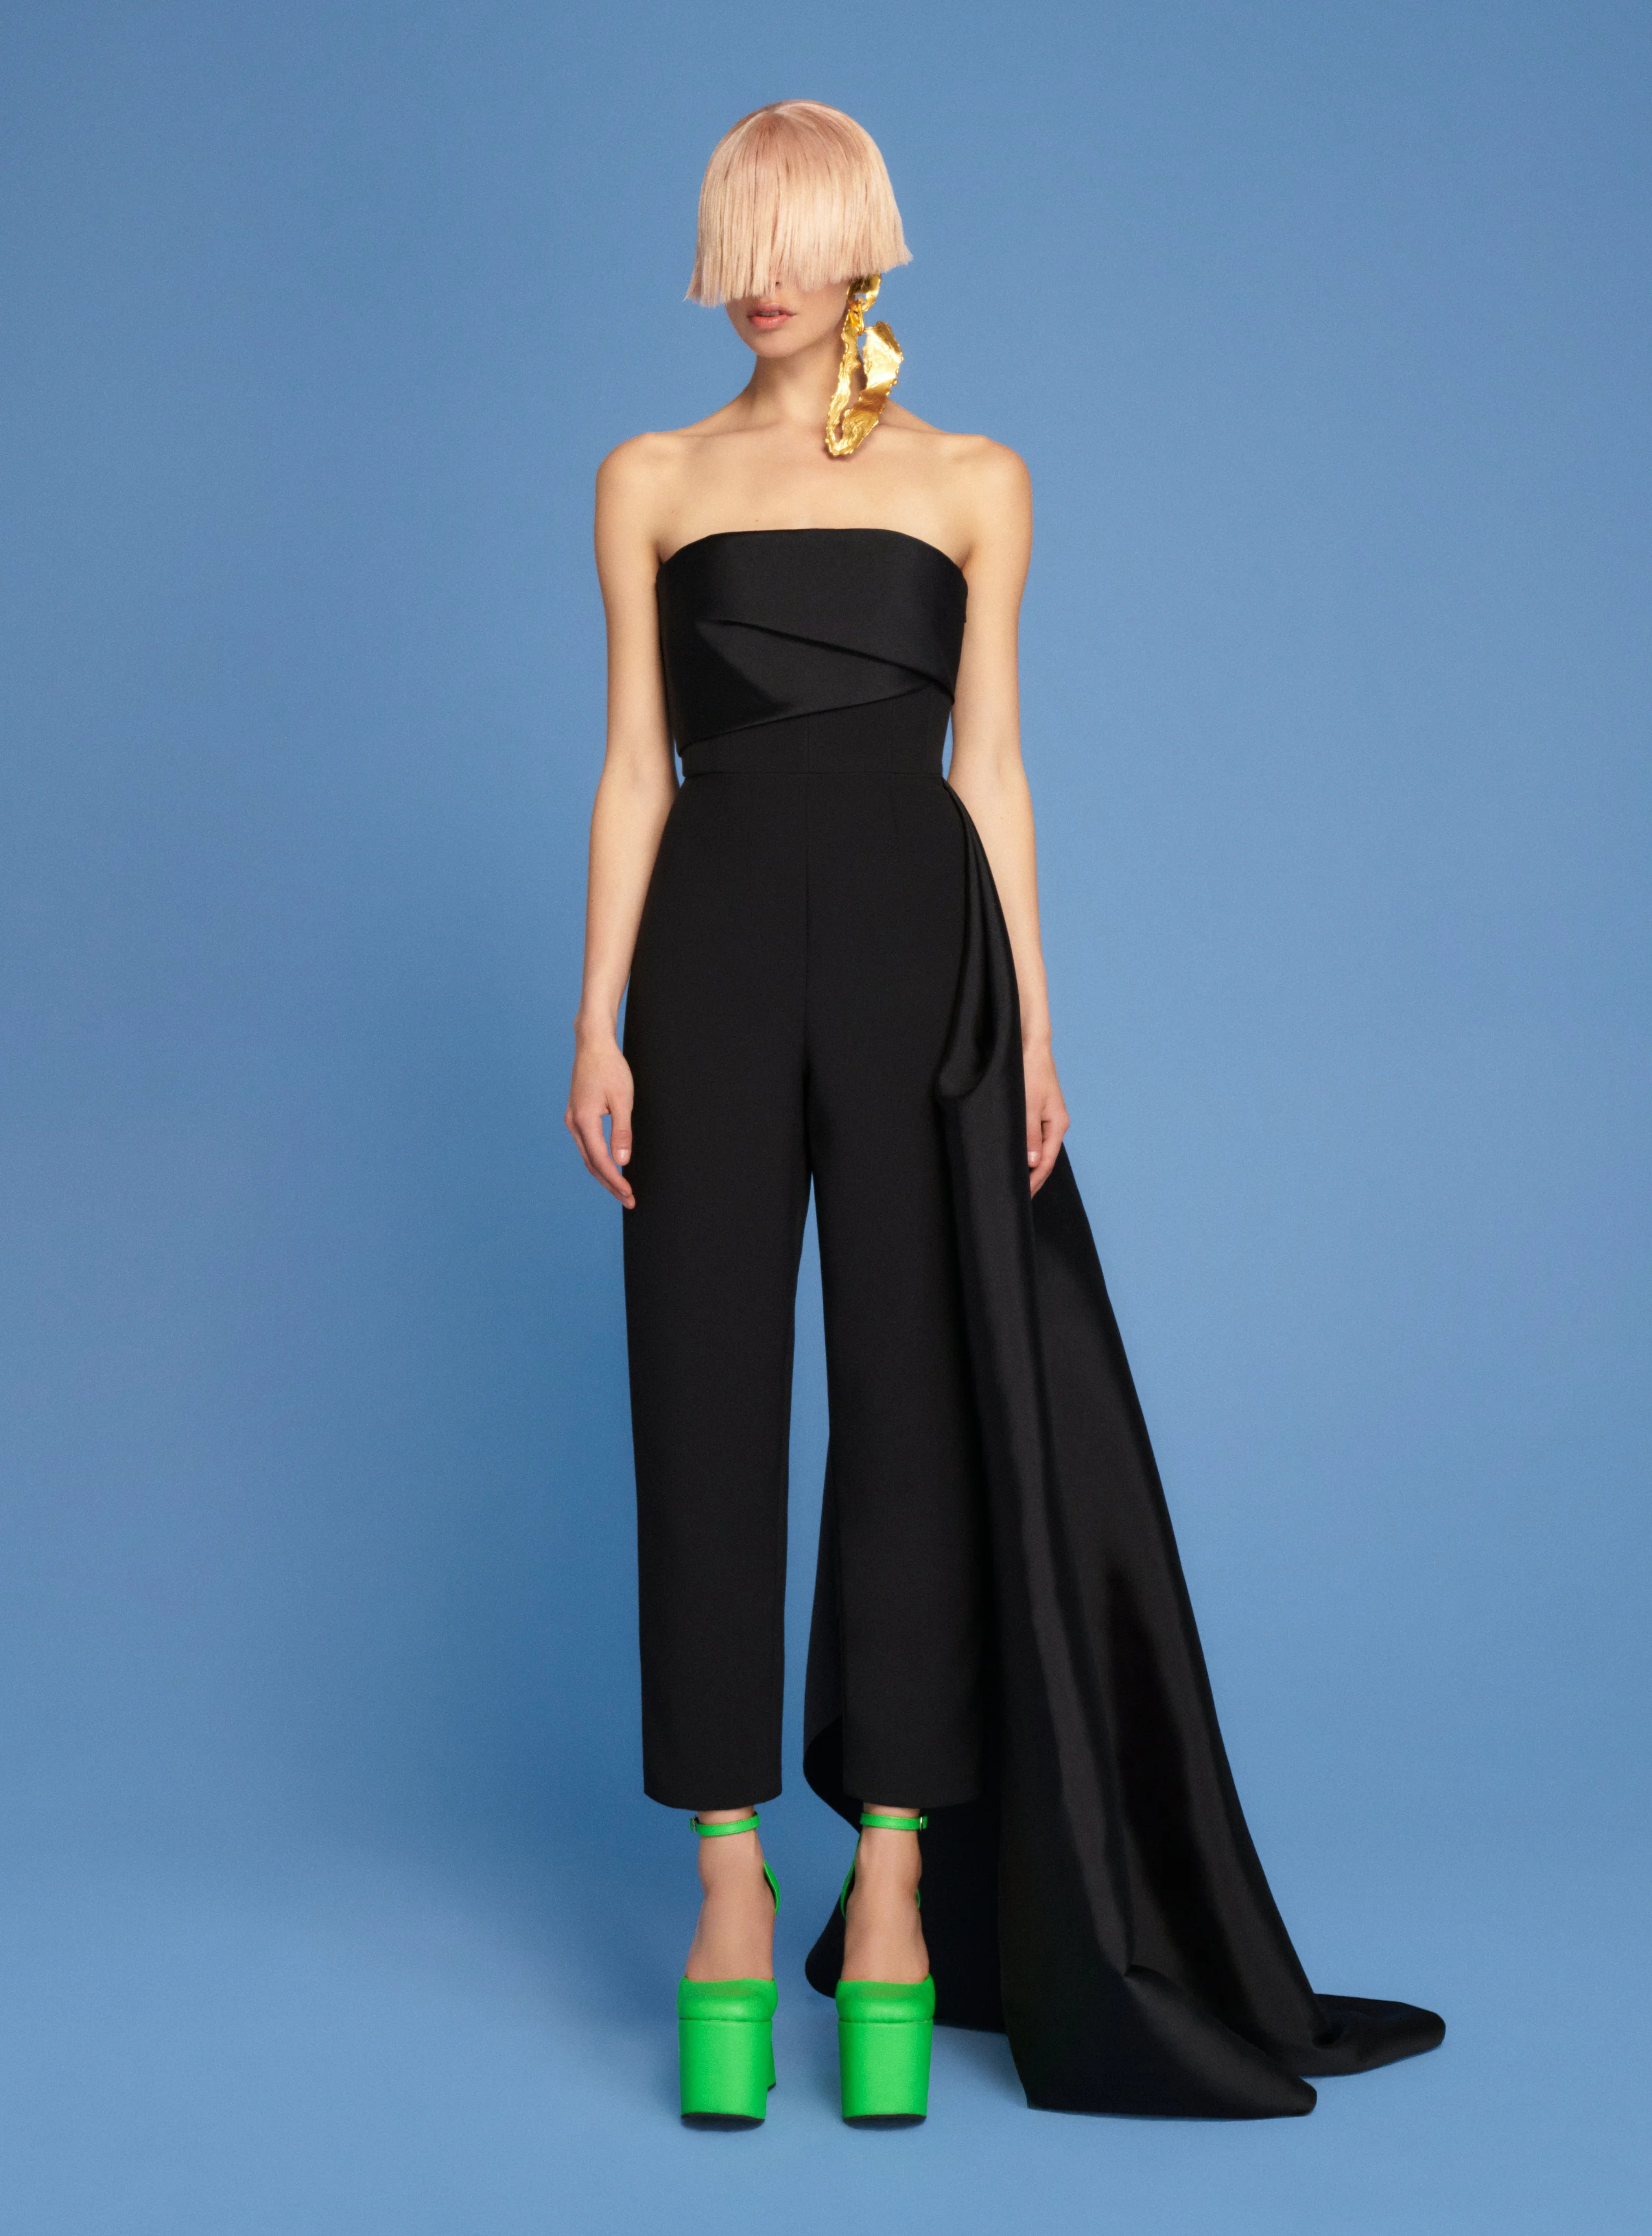 Make a Statement with Evening Jumpsuits